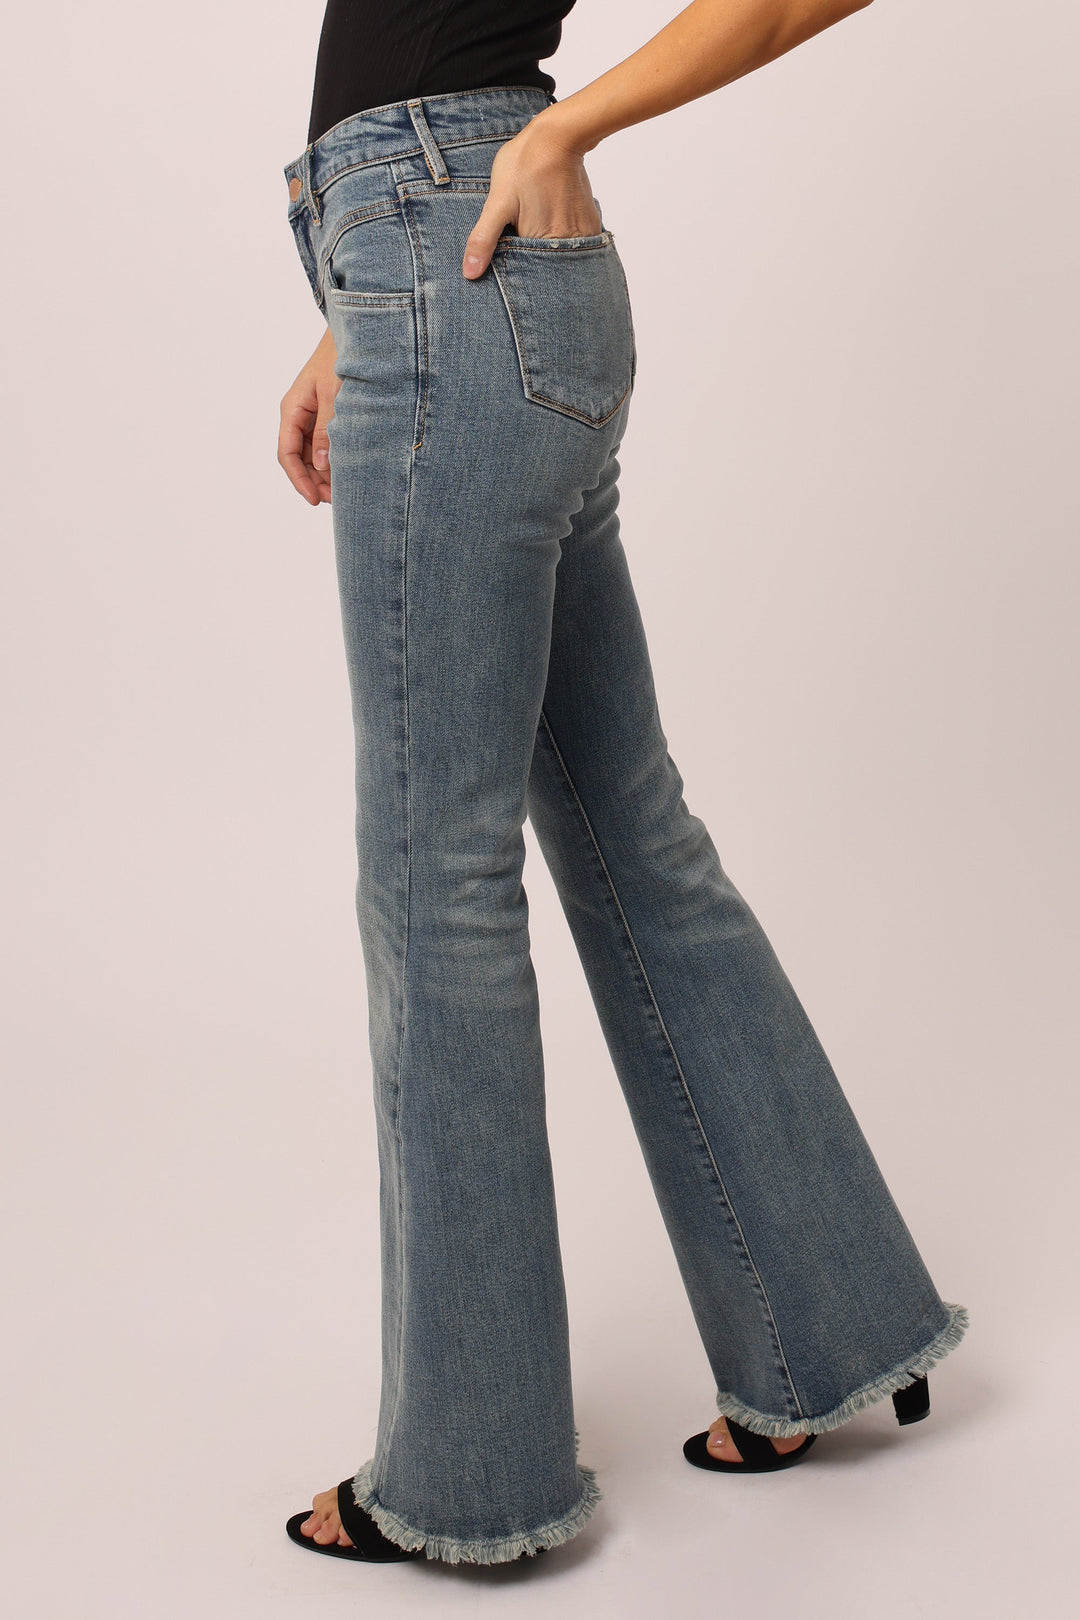 ROSA HIGH RISE FLARE JEANS STOKES CANYON